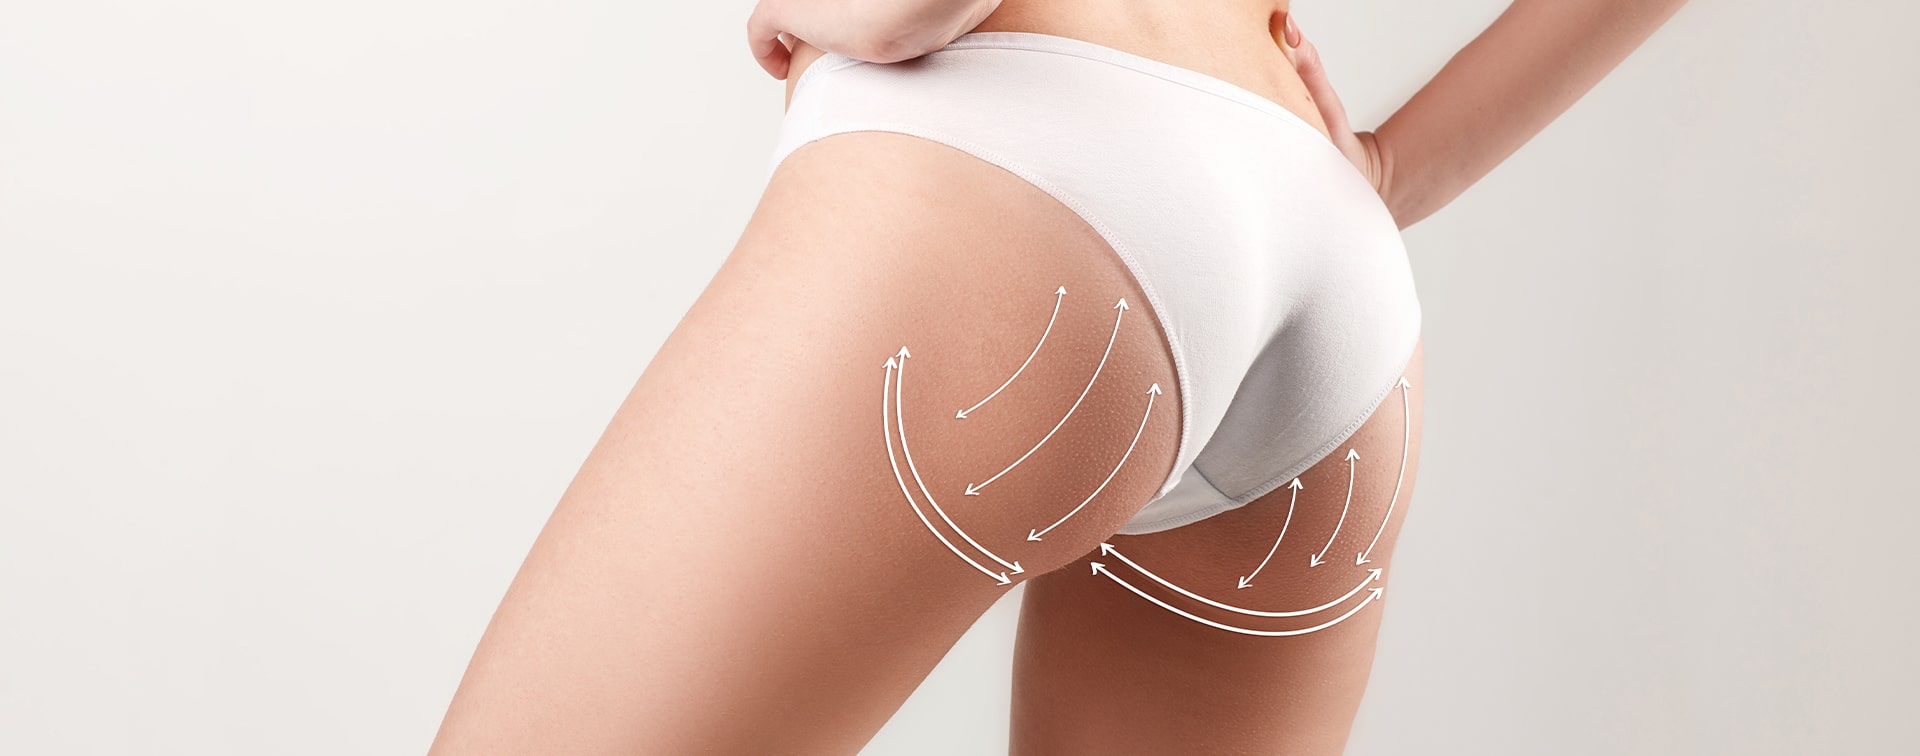 Buttock Lift & Reduction in turkey